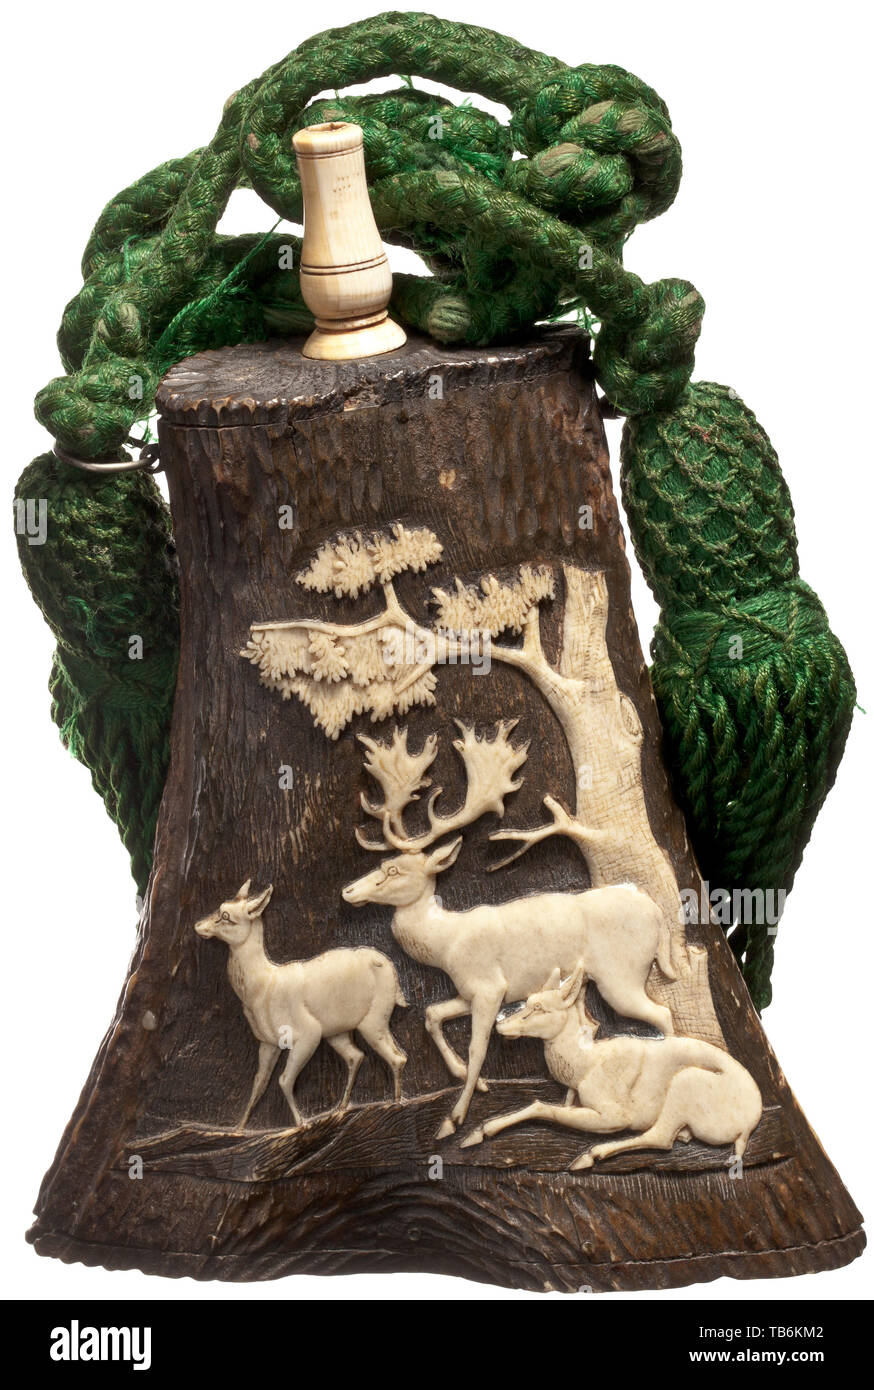 A large staghorn powder flask, Thuringia, circa 1830, The body carved in one piece from a naturally grown stag horn, with an inset base and lid. On the front, a fine carving of a fallow deer stag with two fallow does under a tree. The spout made of bone. Two lateral iron strap lugs, a green carrying cord with tassels still attached. Height 19 cm. Carvings of this type are generally attributed to the workshop of Leberecht Schulz, who worked in Meiningen and Thuringia. powder flask, accessory, accessories, military, militaria, object, objects, stil, Additional-Rights-Clearance-Info-Not-Available Stock Photo